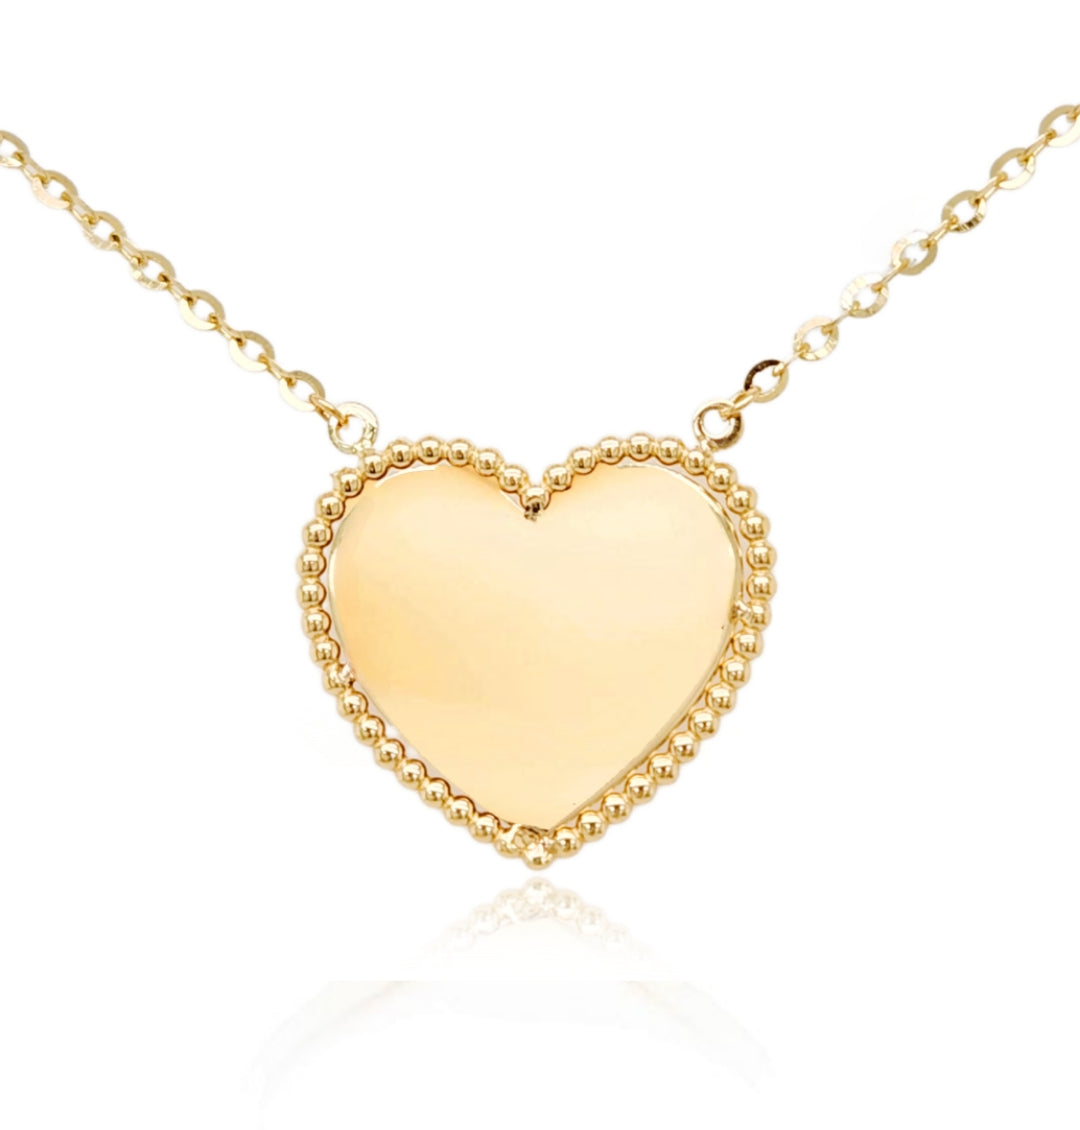 14K Gold Heart Necklace with Beaded Border